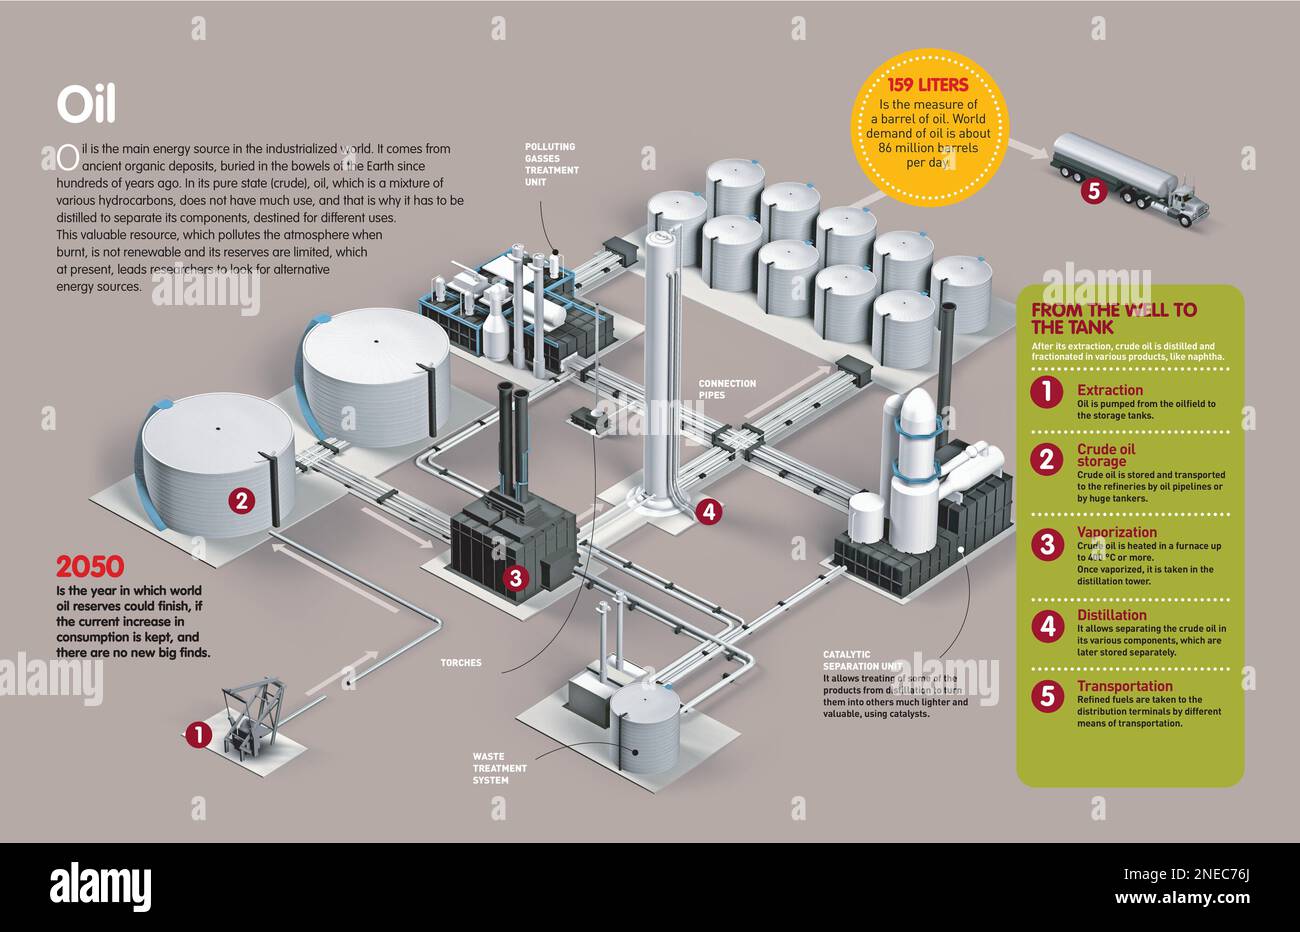 Infographic about the process of obtaining oil and other of its components, from extraction of crude oil to its treatment and transportation. [QuarkXPress (.qxp); Adobe InDesign (.indd); 4960x3188]. Stock Photo